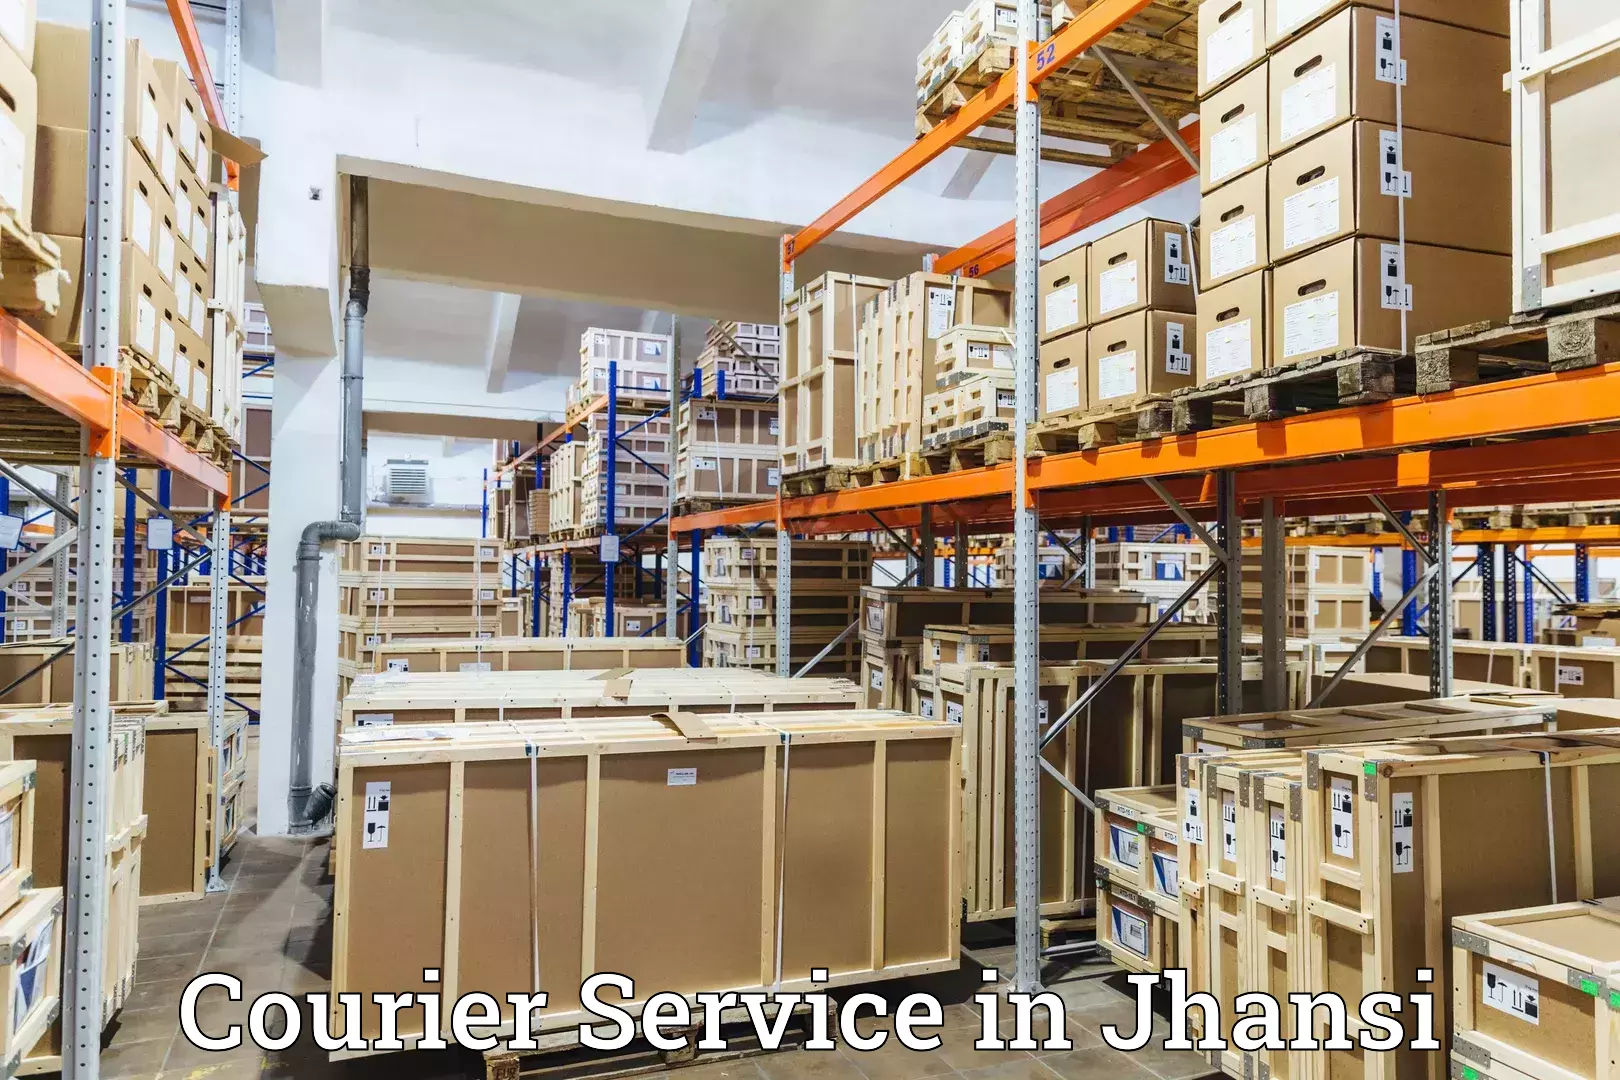 Courier service innovation in Jhansi